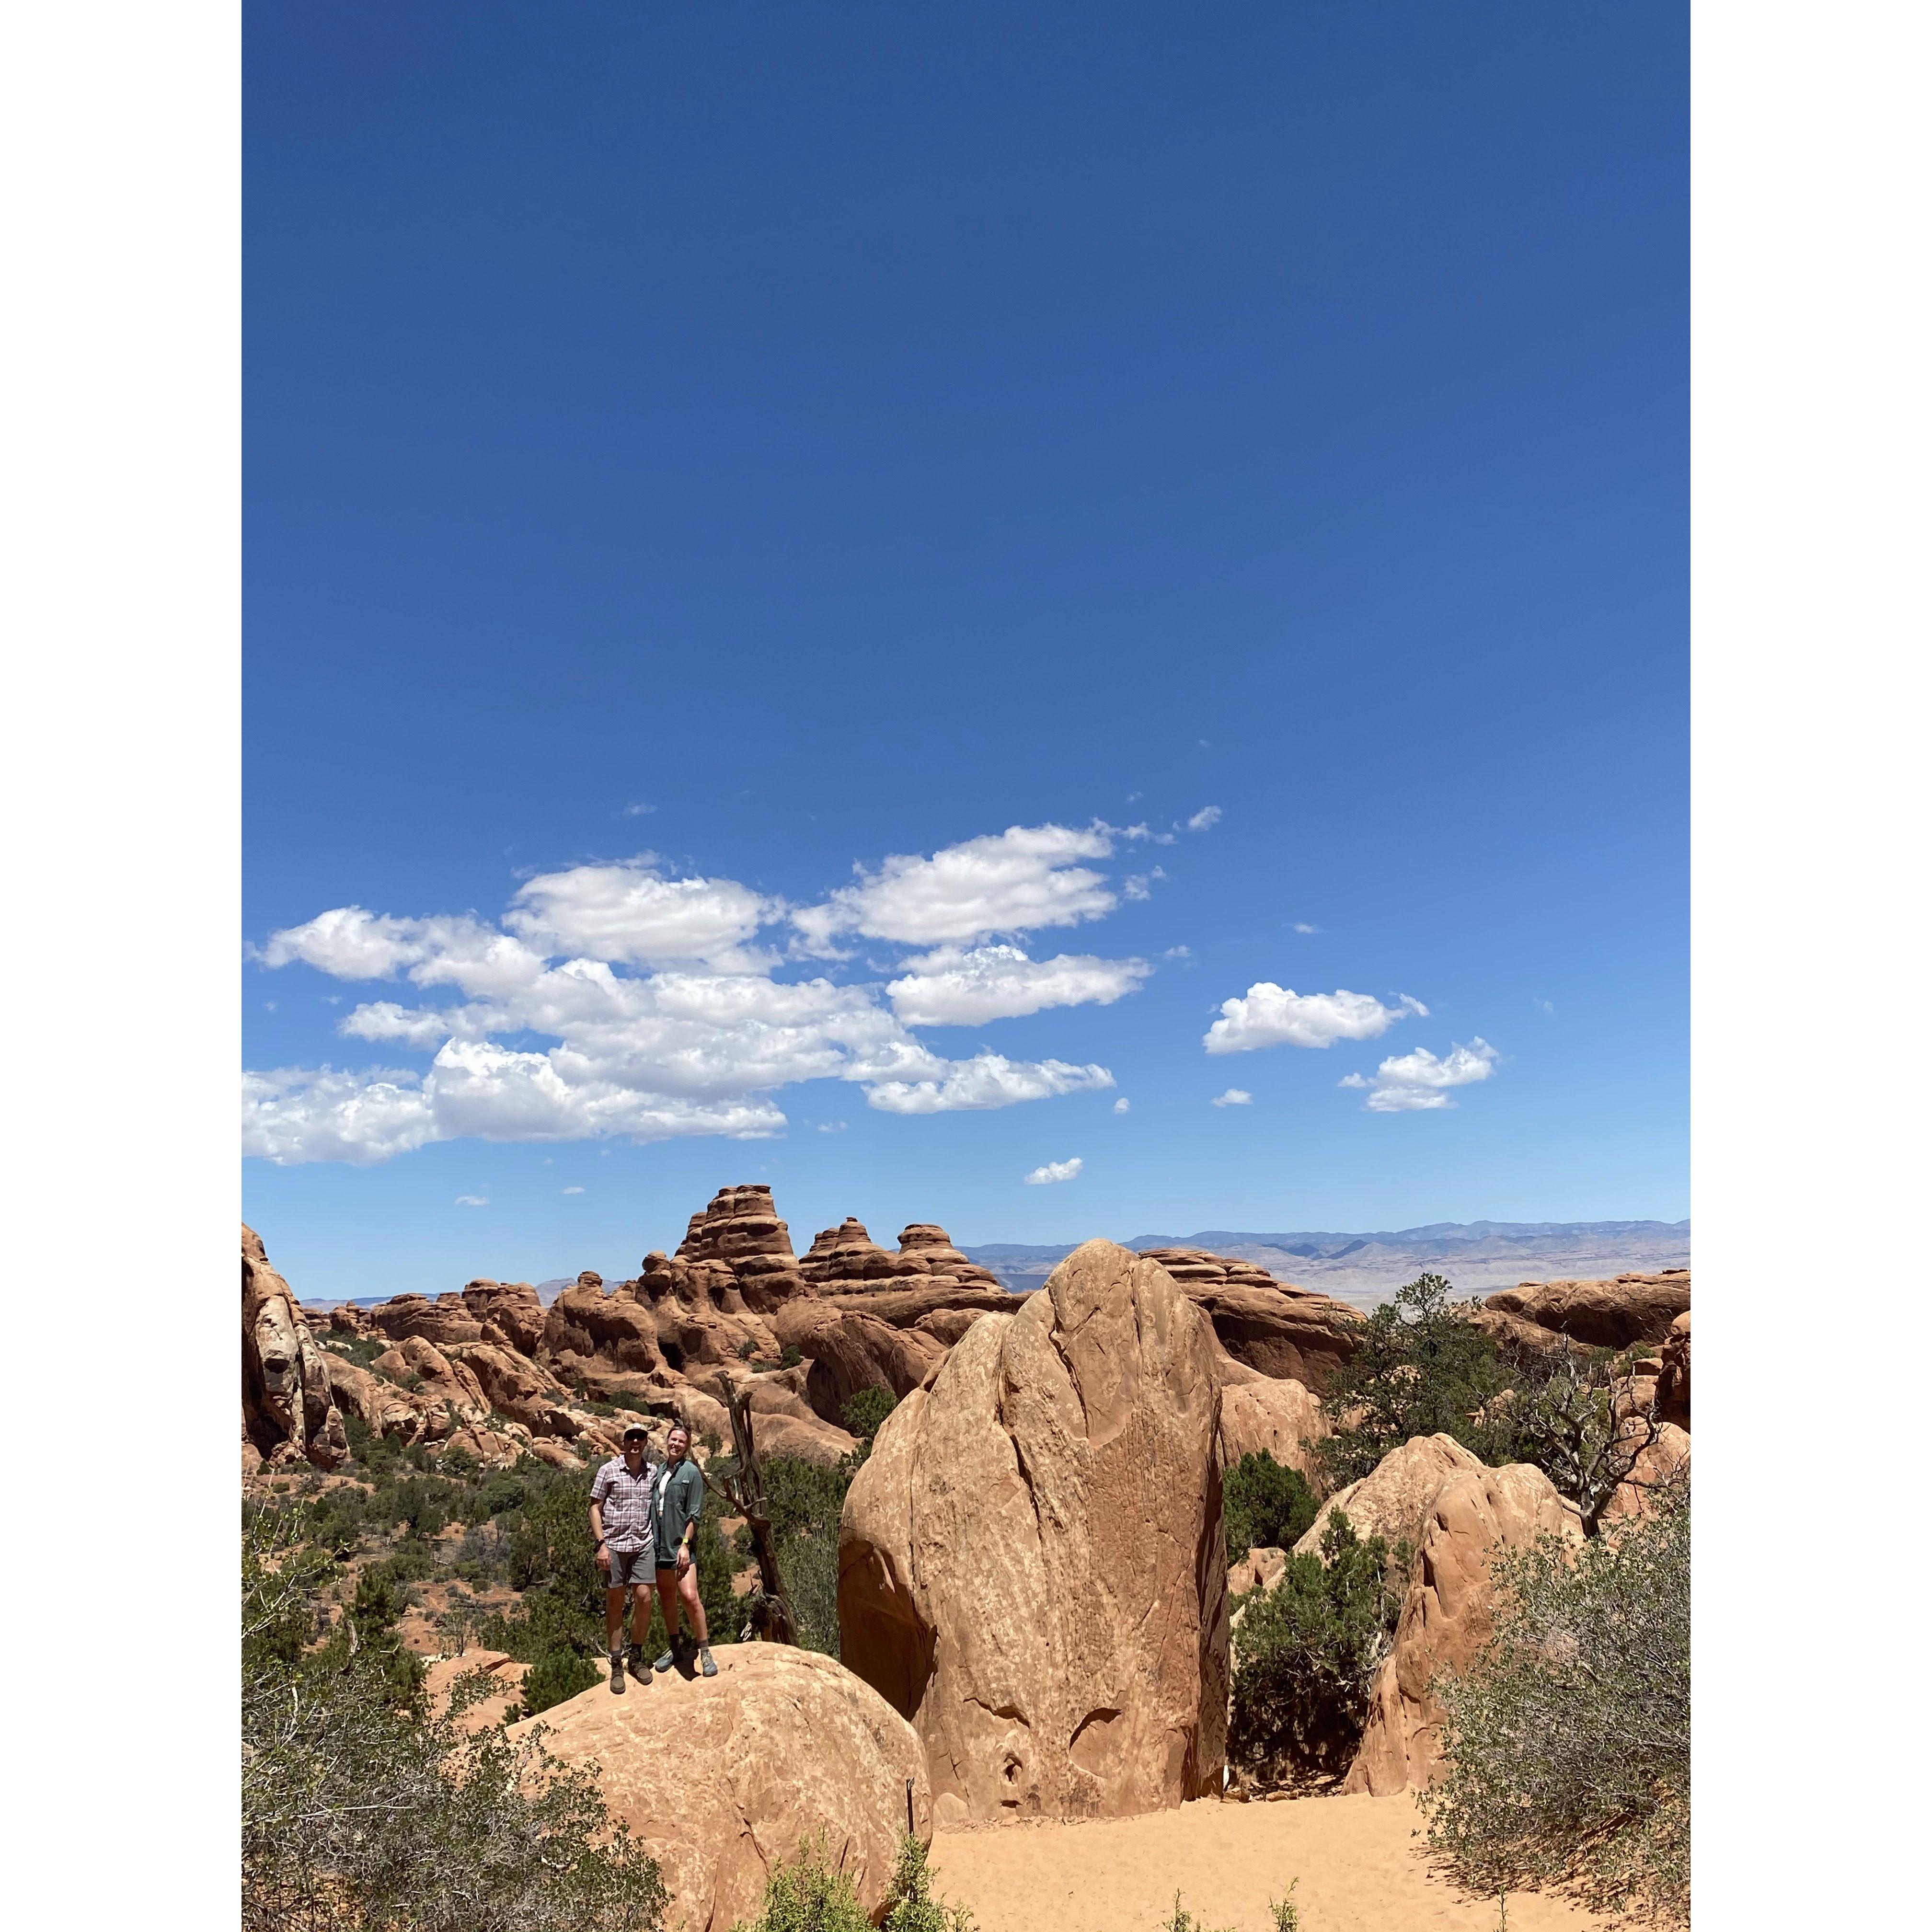 Graduation trip with Abi's family to Arches National Park.